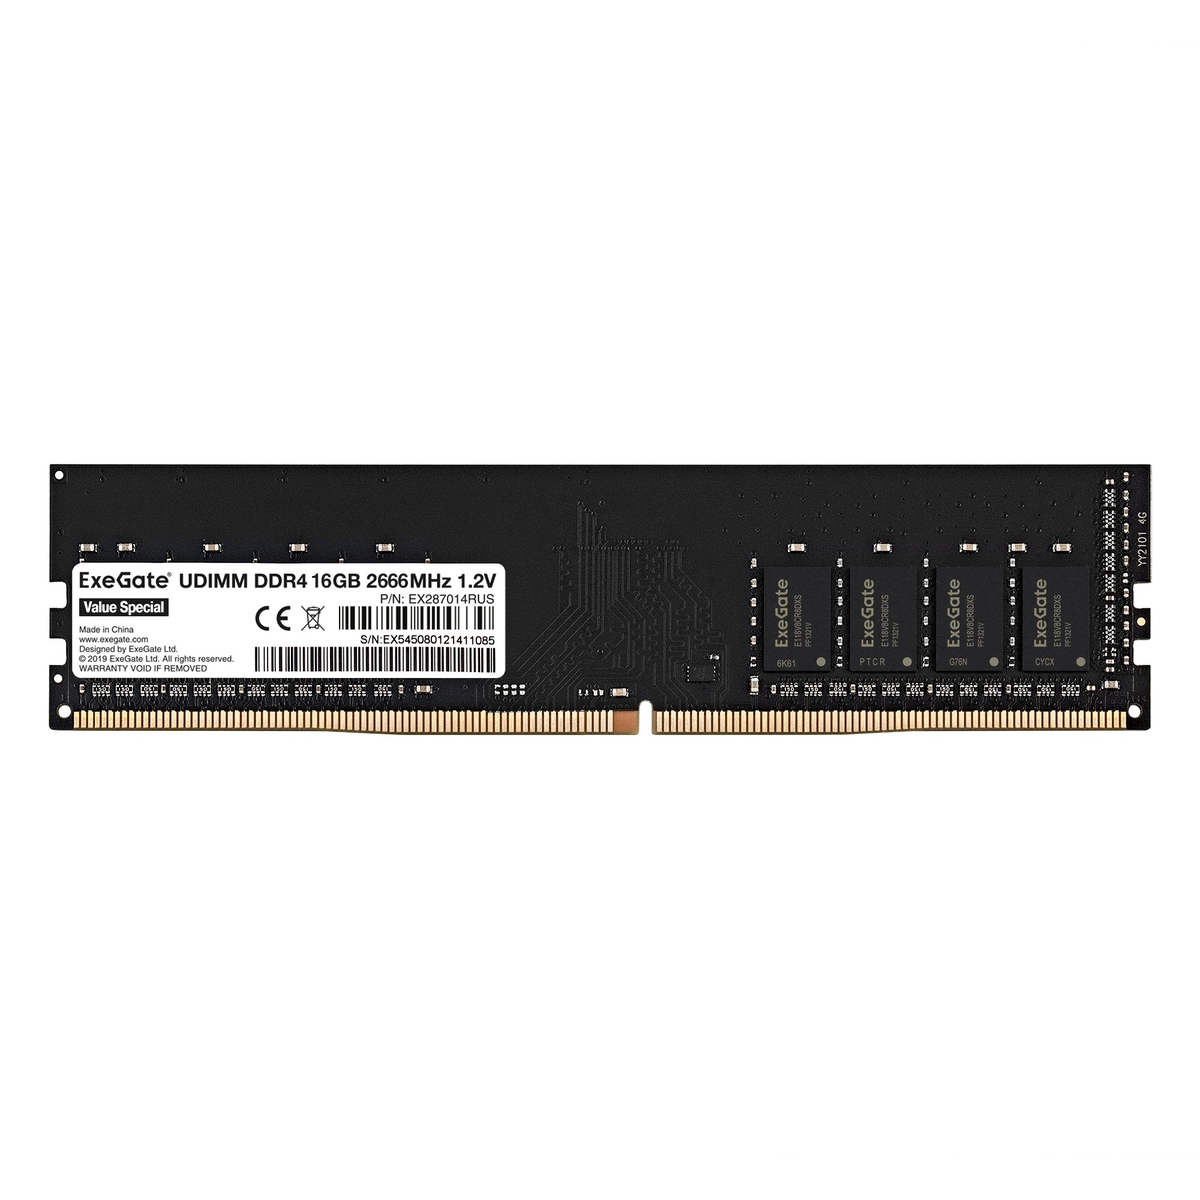 Value Special DIMM DDR4 16GB 2666MHz